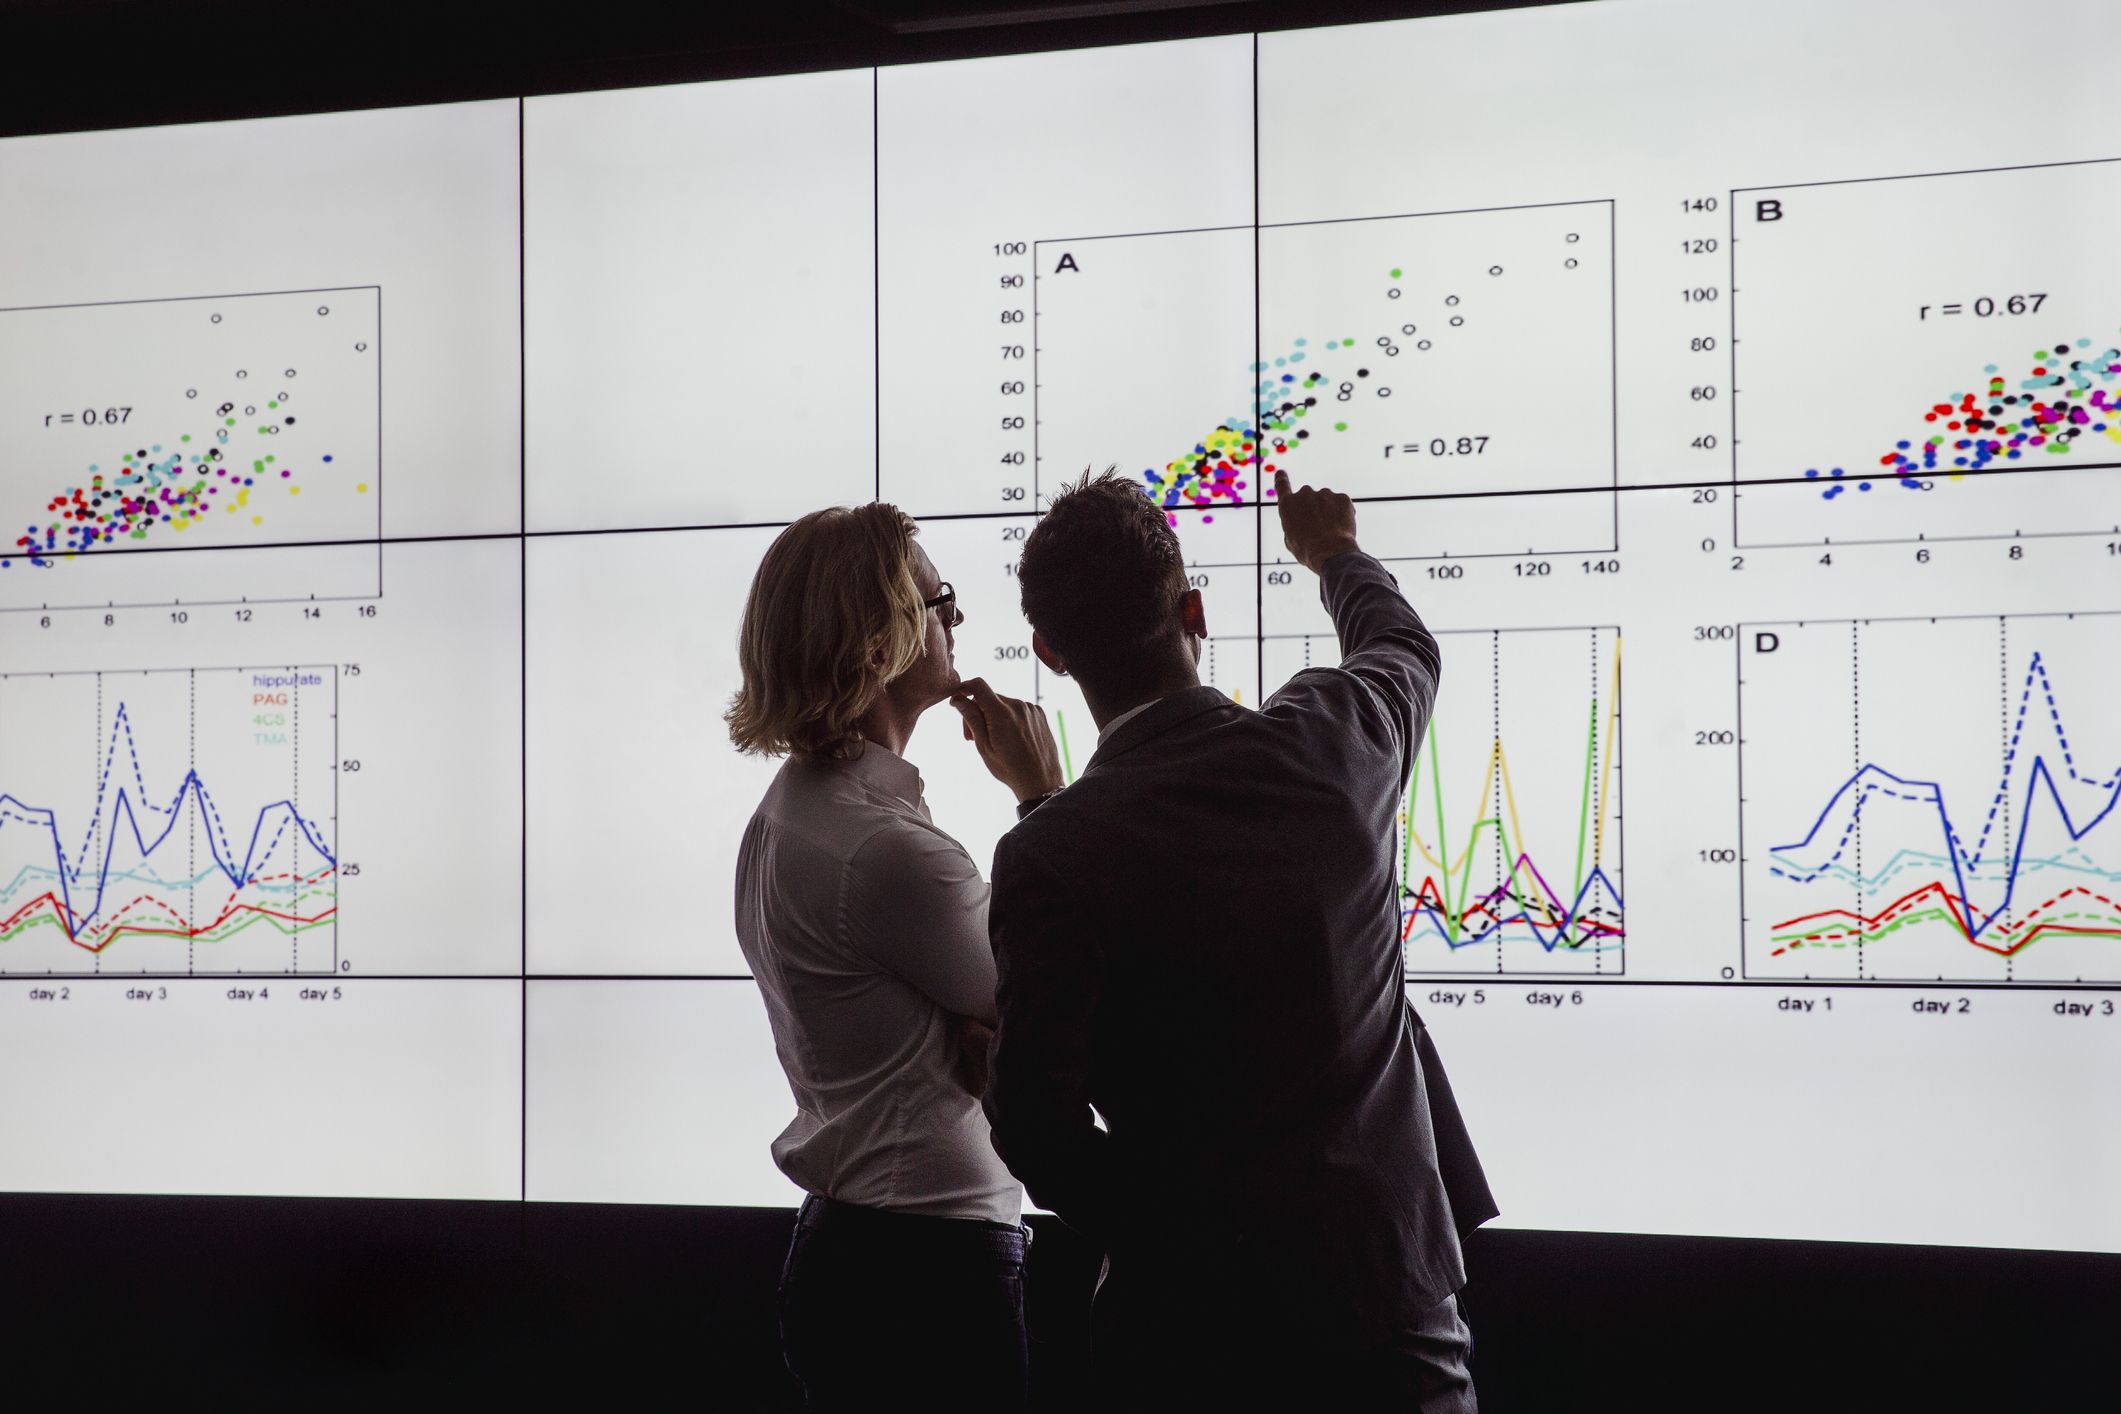 a man and a woman standing at a wall of monitors with scatterplots and line charts on them